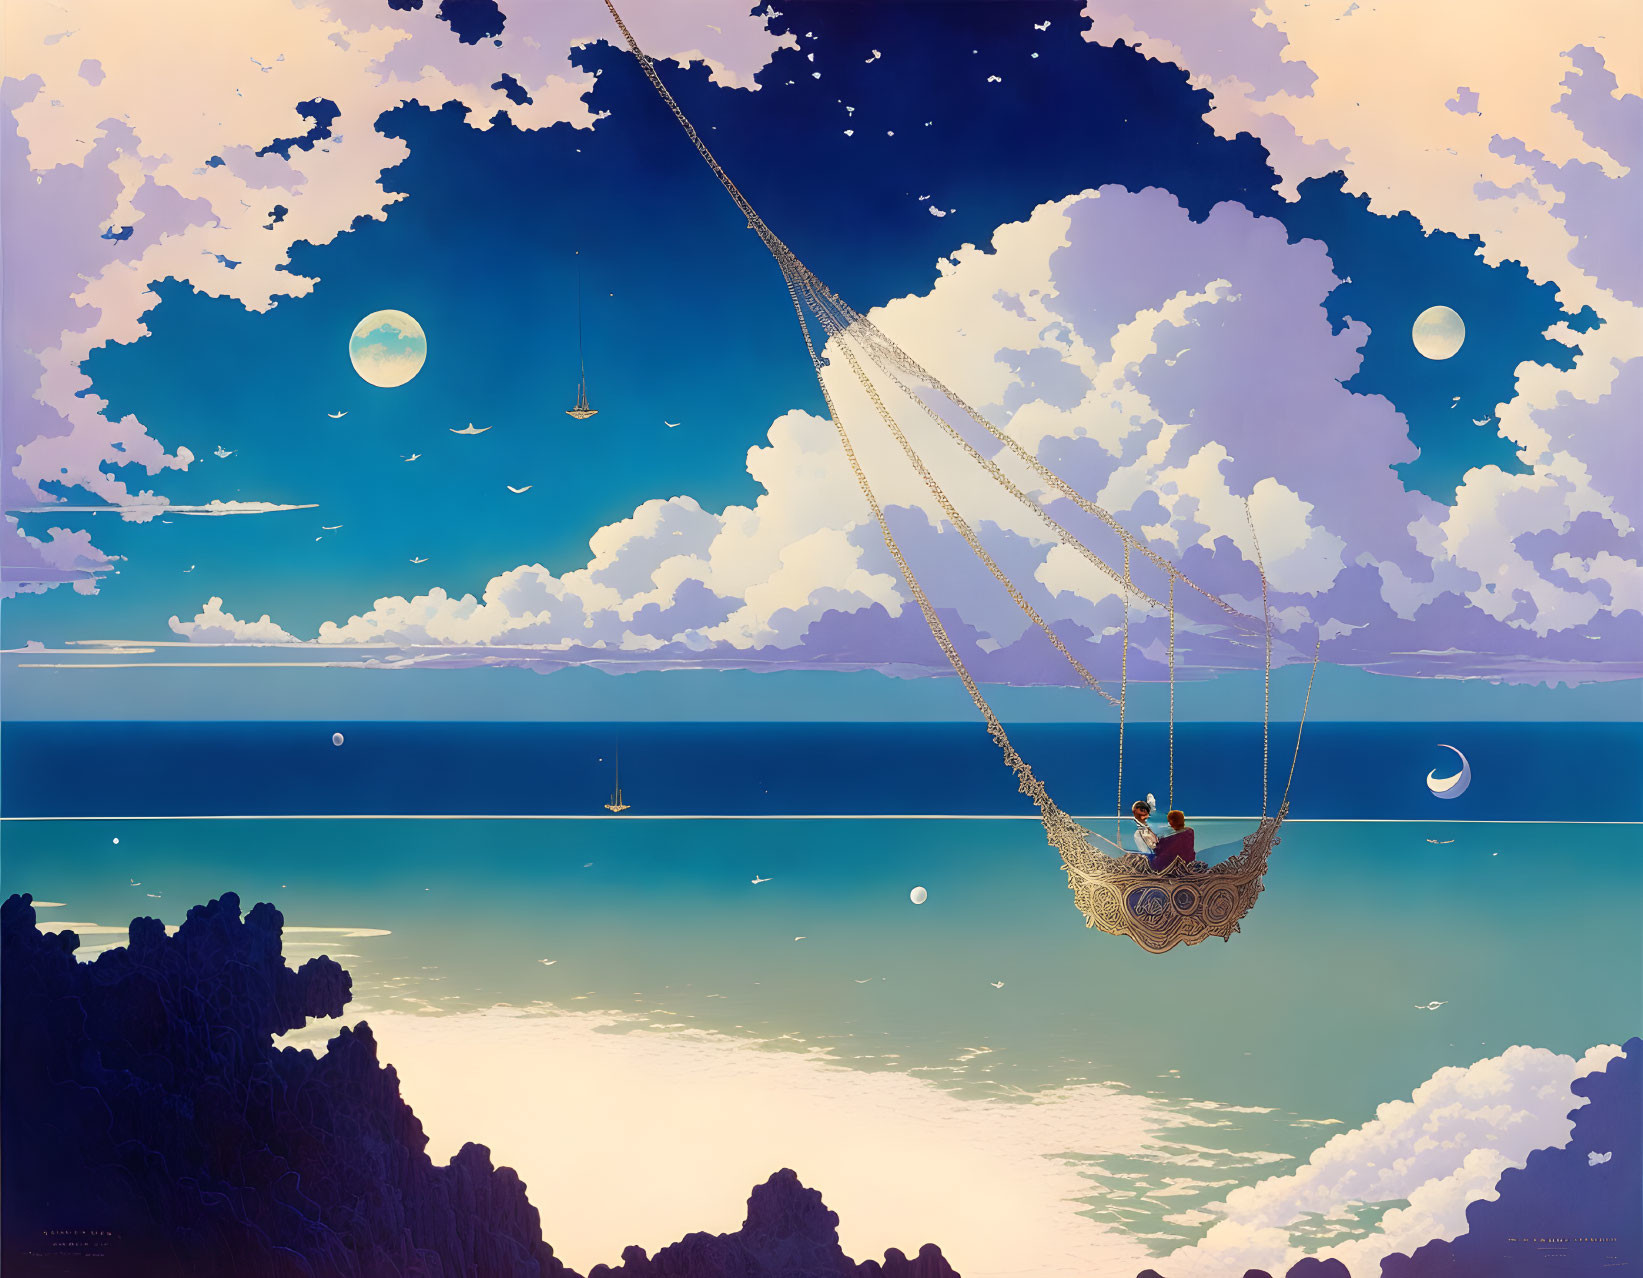 Fantastical landscape with couple in swinging boat over calm waters at dusk